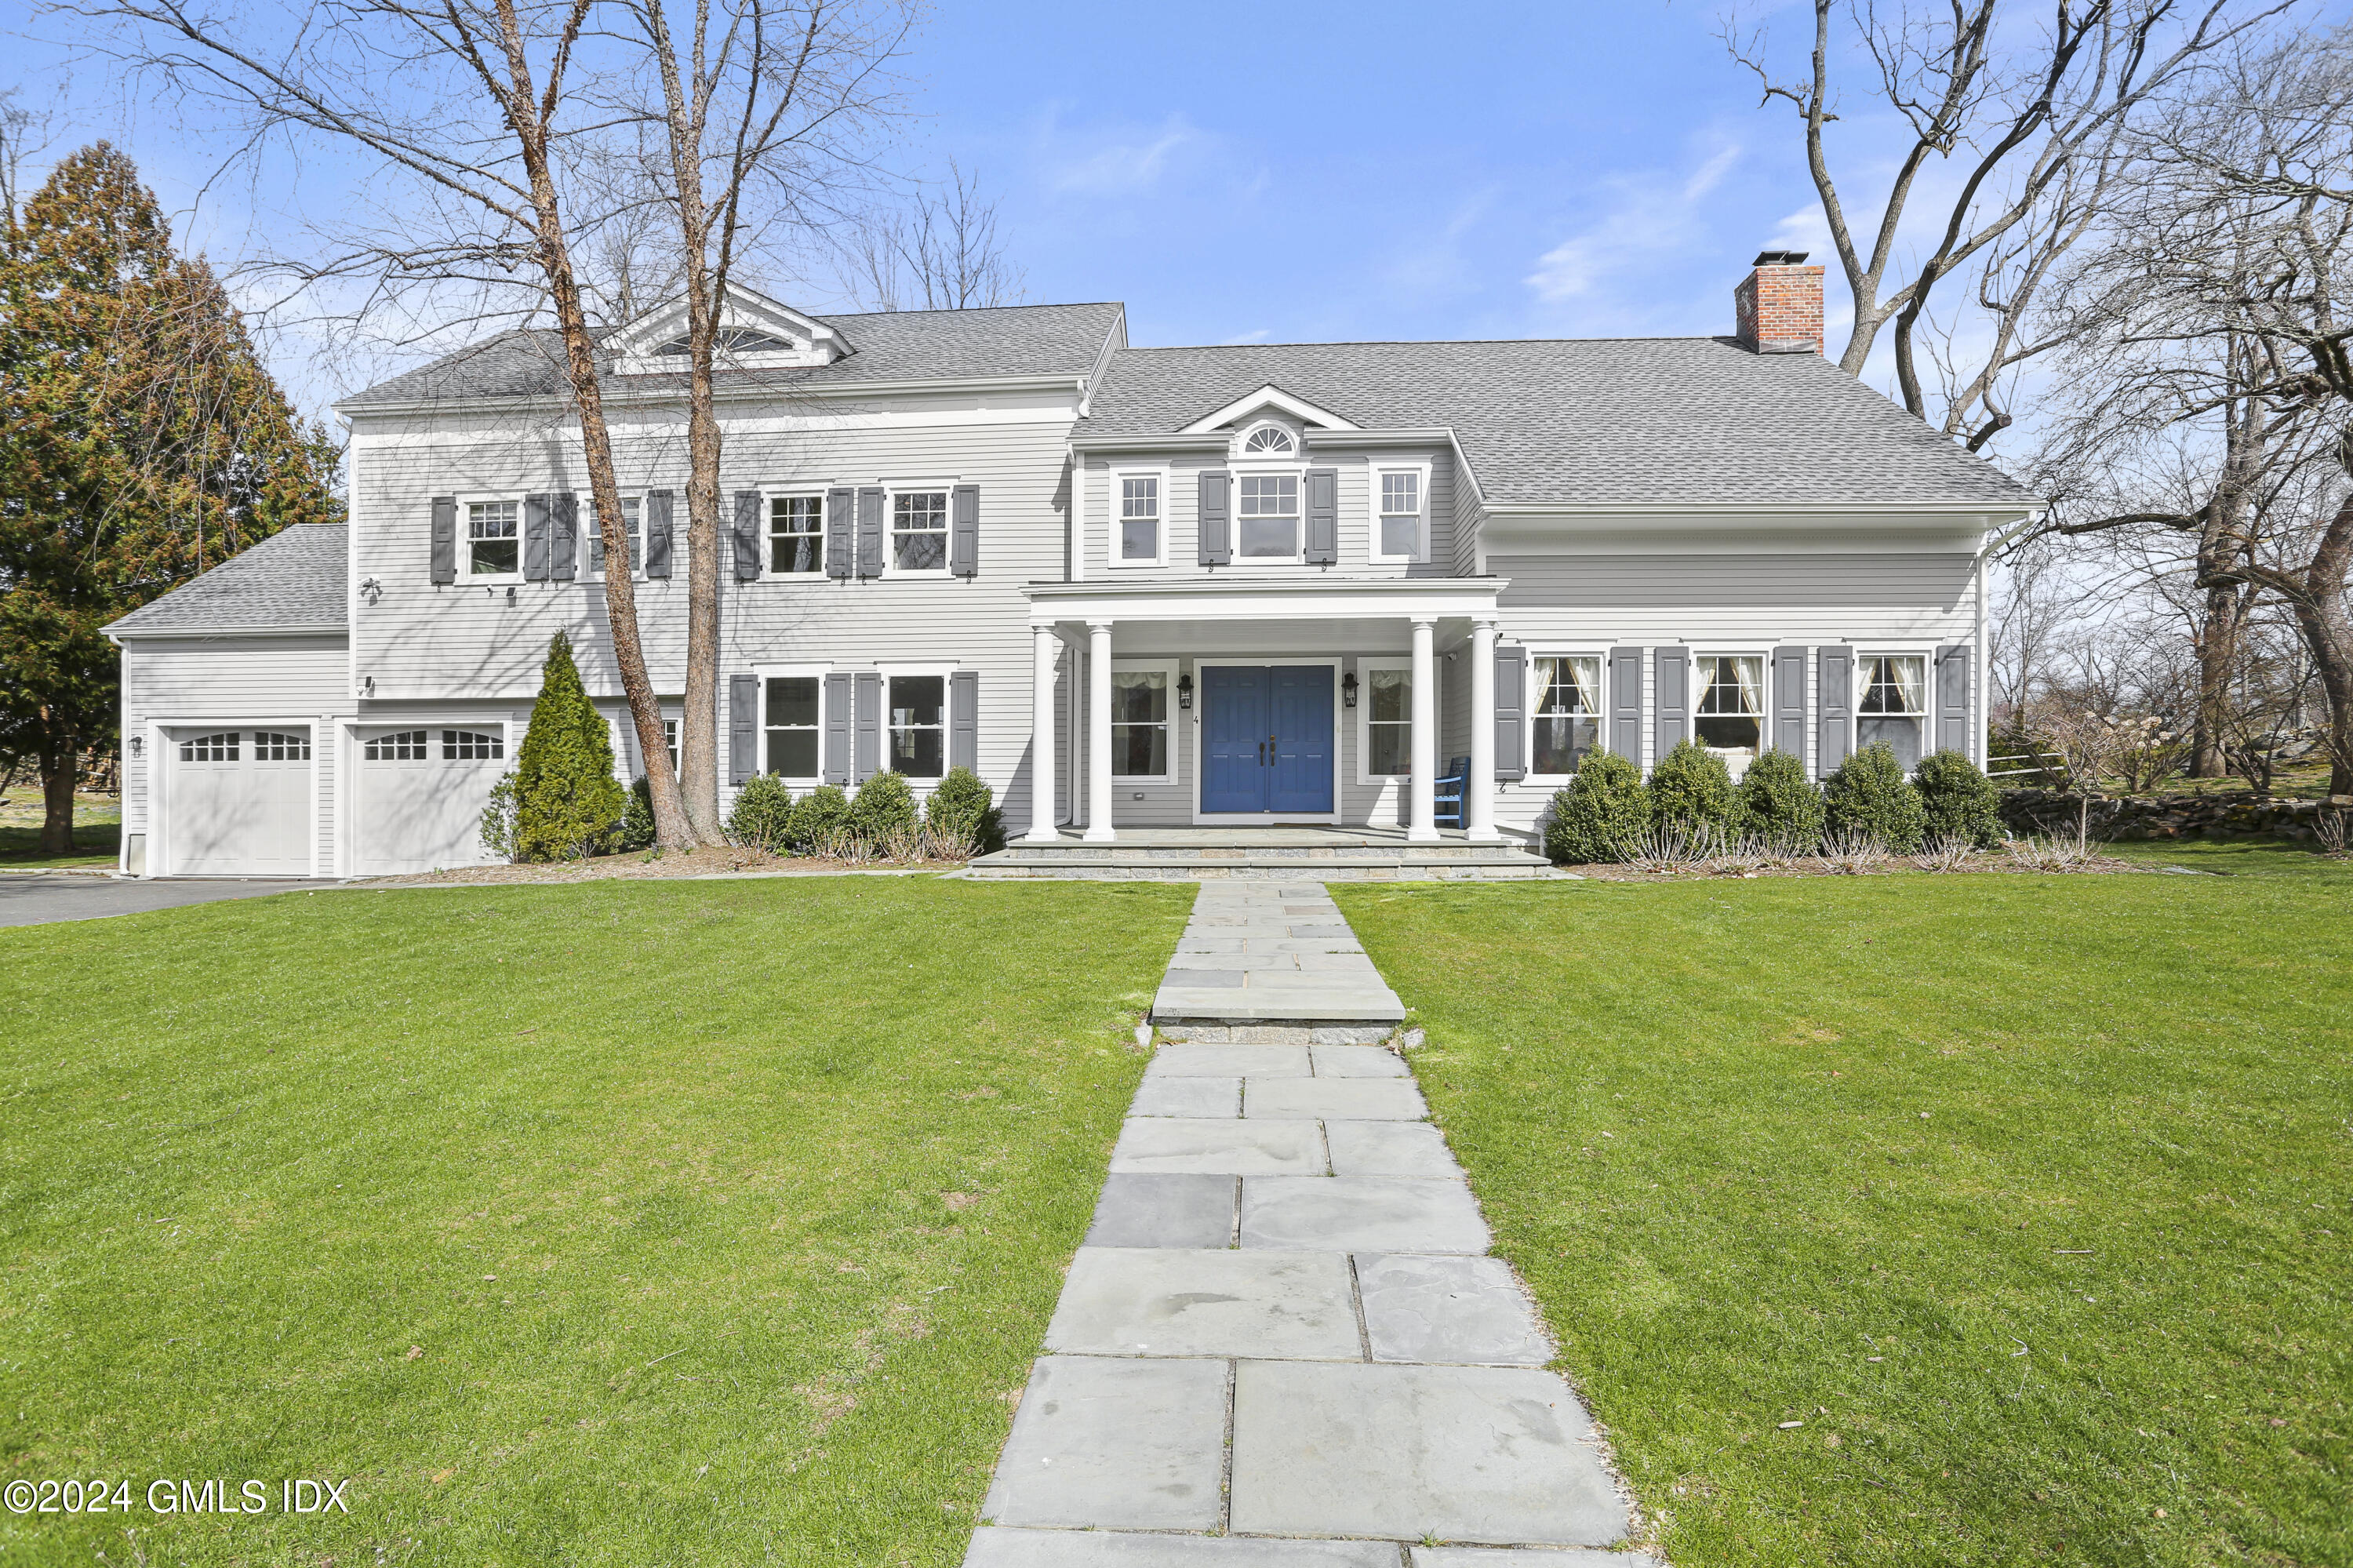 4 Gisborne Place, Old Greenwich, Connecticut - 5 Bedrooms  
5 Bathrooms - 